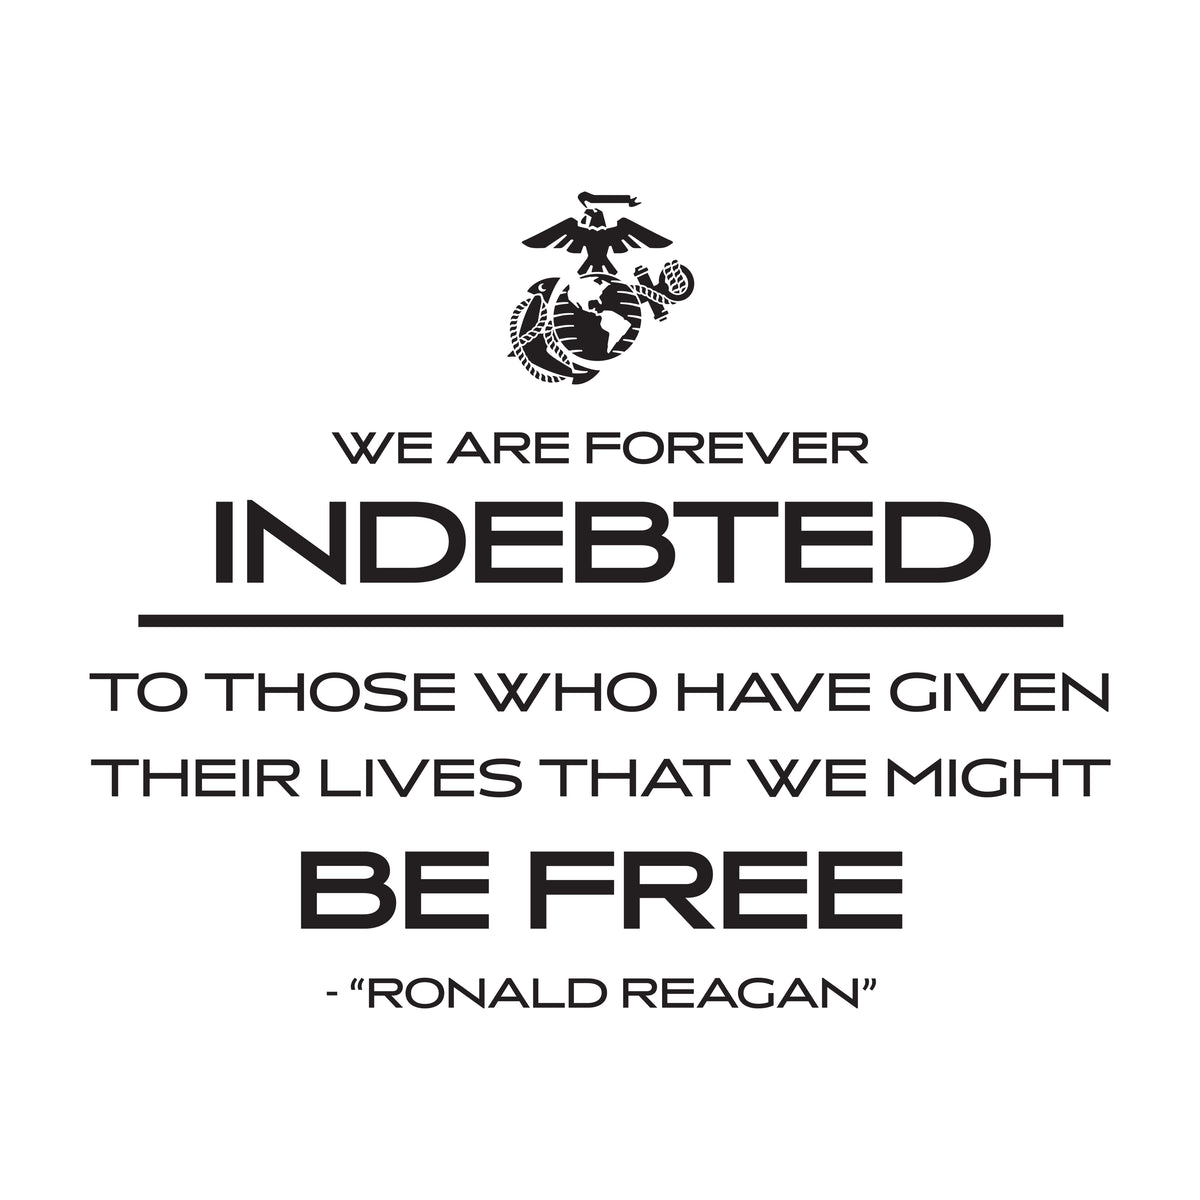 Ronald Reagan Indebted Quote 2-Sided Tee